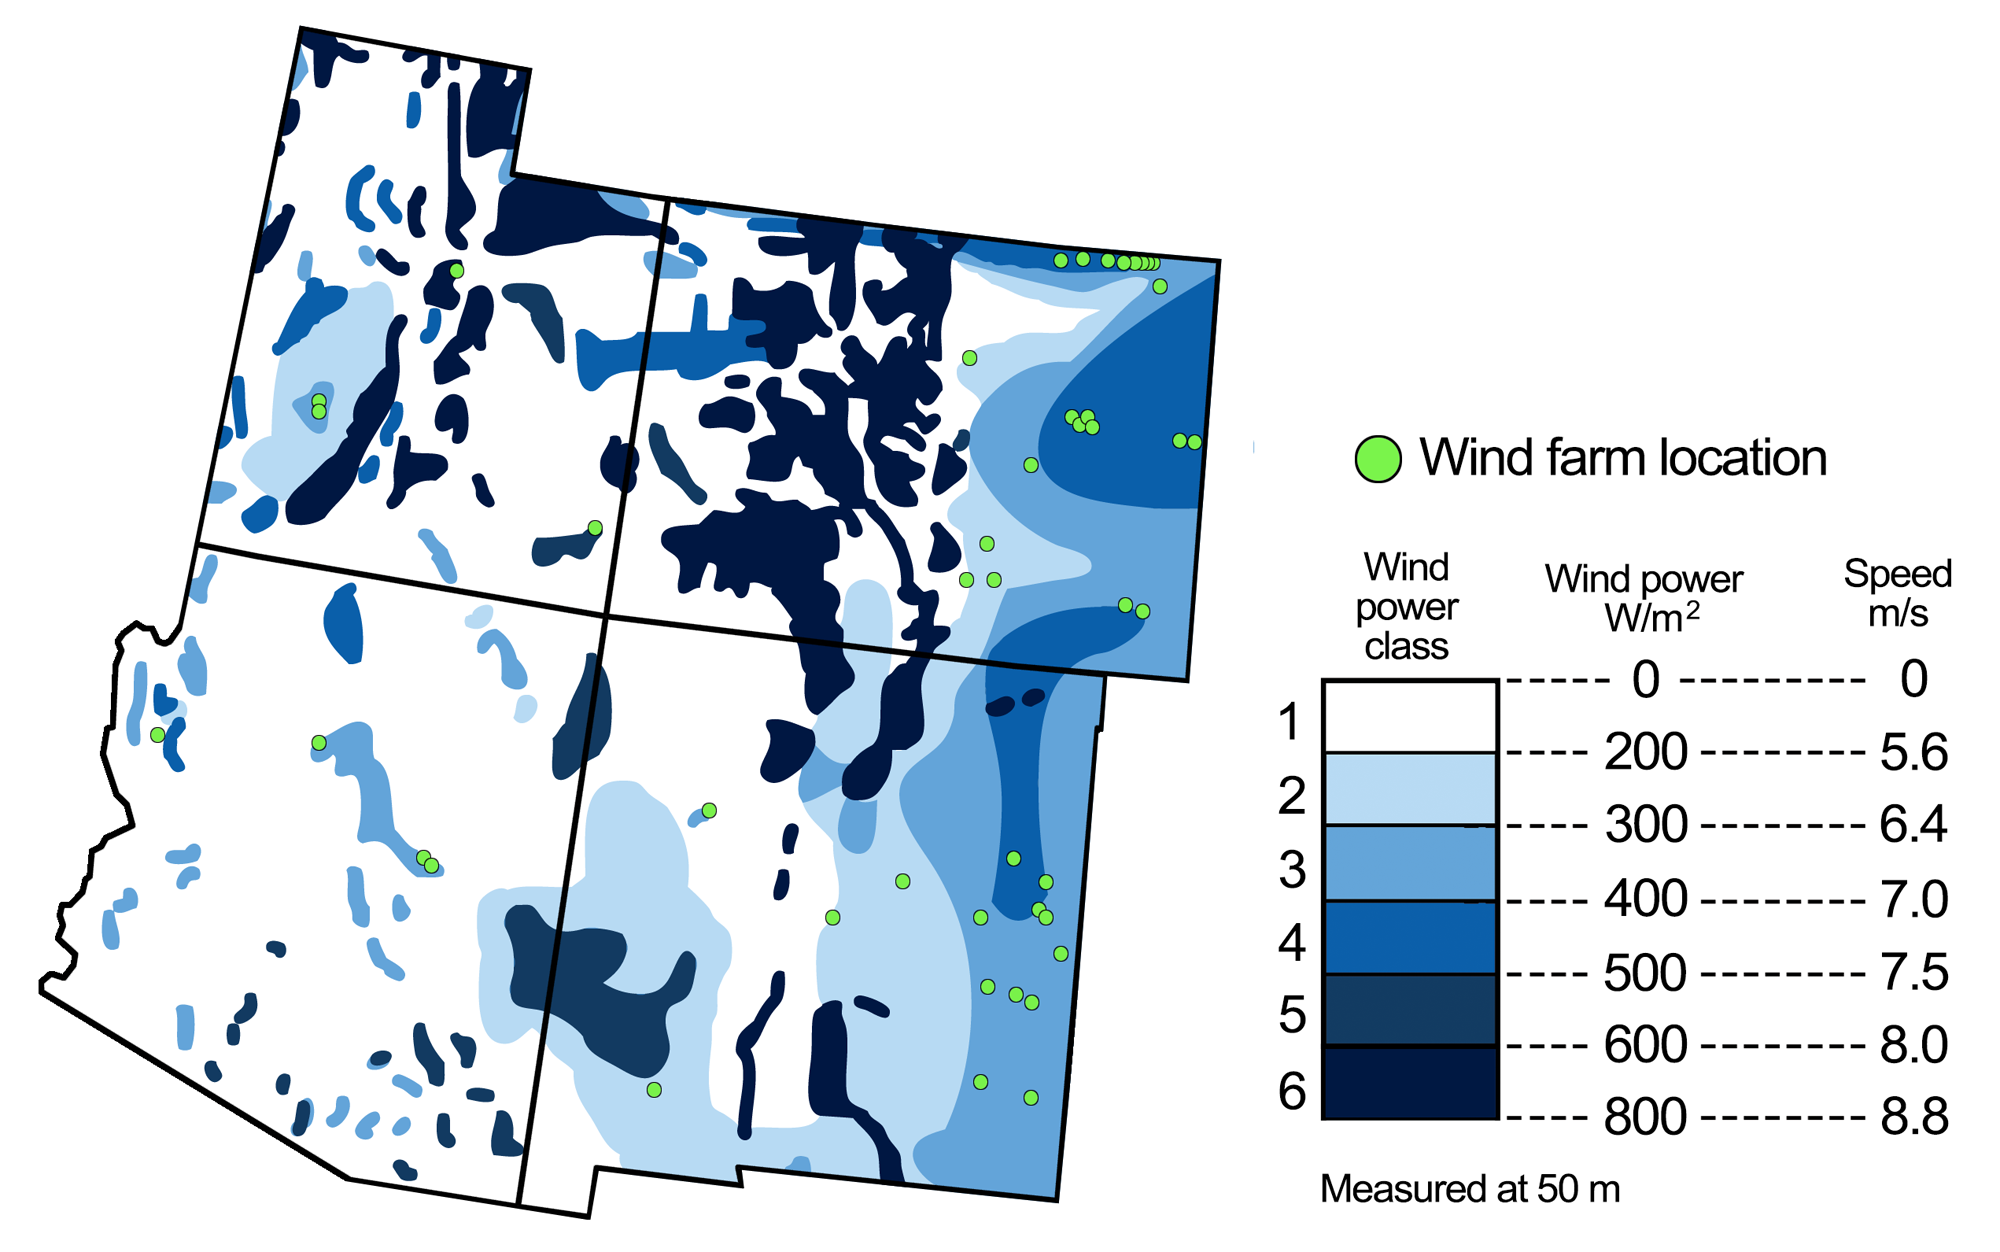 Map showing the four southwestern states (Arizona, Colorado, New Mexico, and Utah) wind power shaded vary intensities of white to dark blue. Much of the area has potential for wind energy production. Wind farm locations are marked with green dots. Wind farms have been built in all four states.